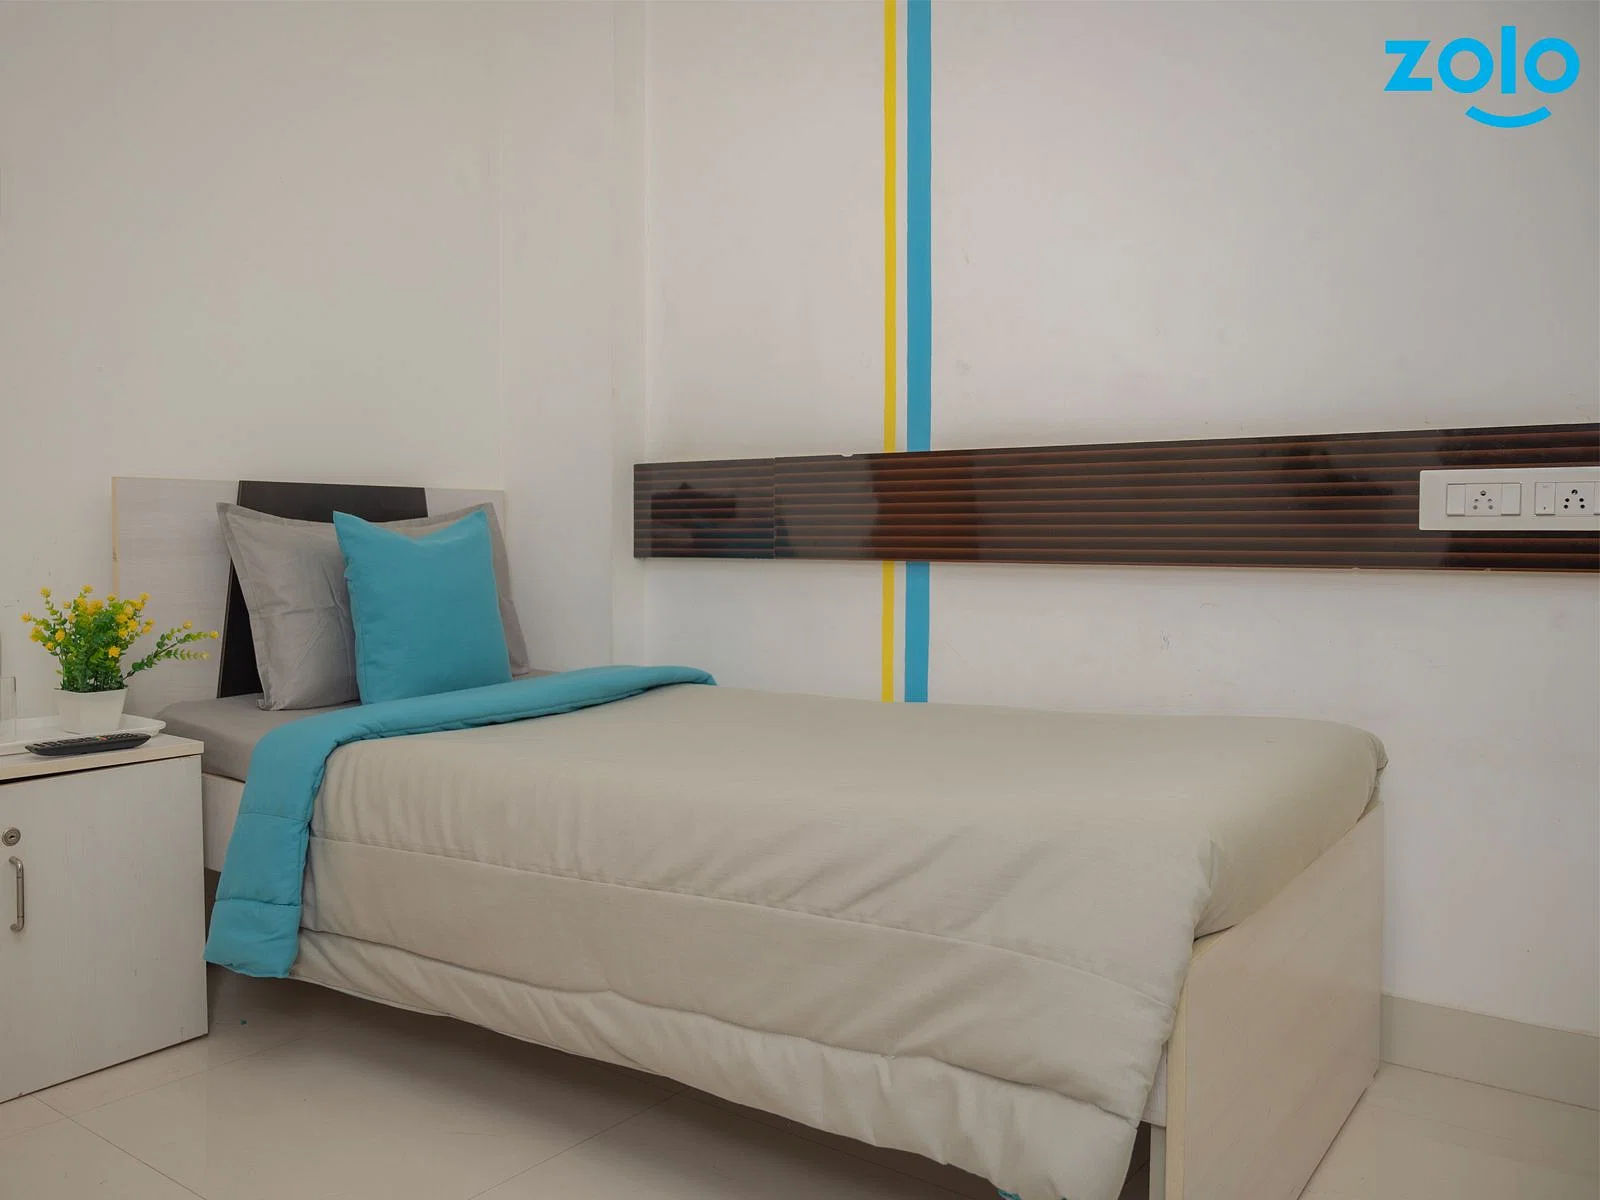 fully furnished Zolo single rooms for rent near me-check out now-Zolo Hazel